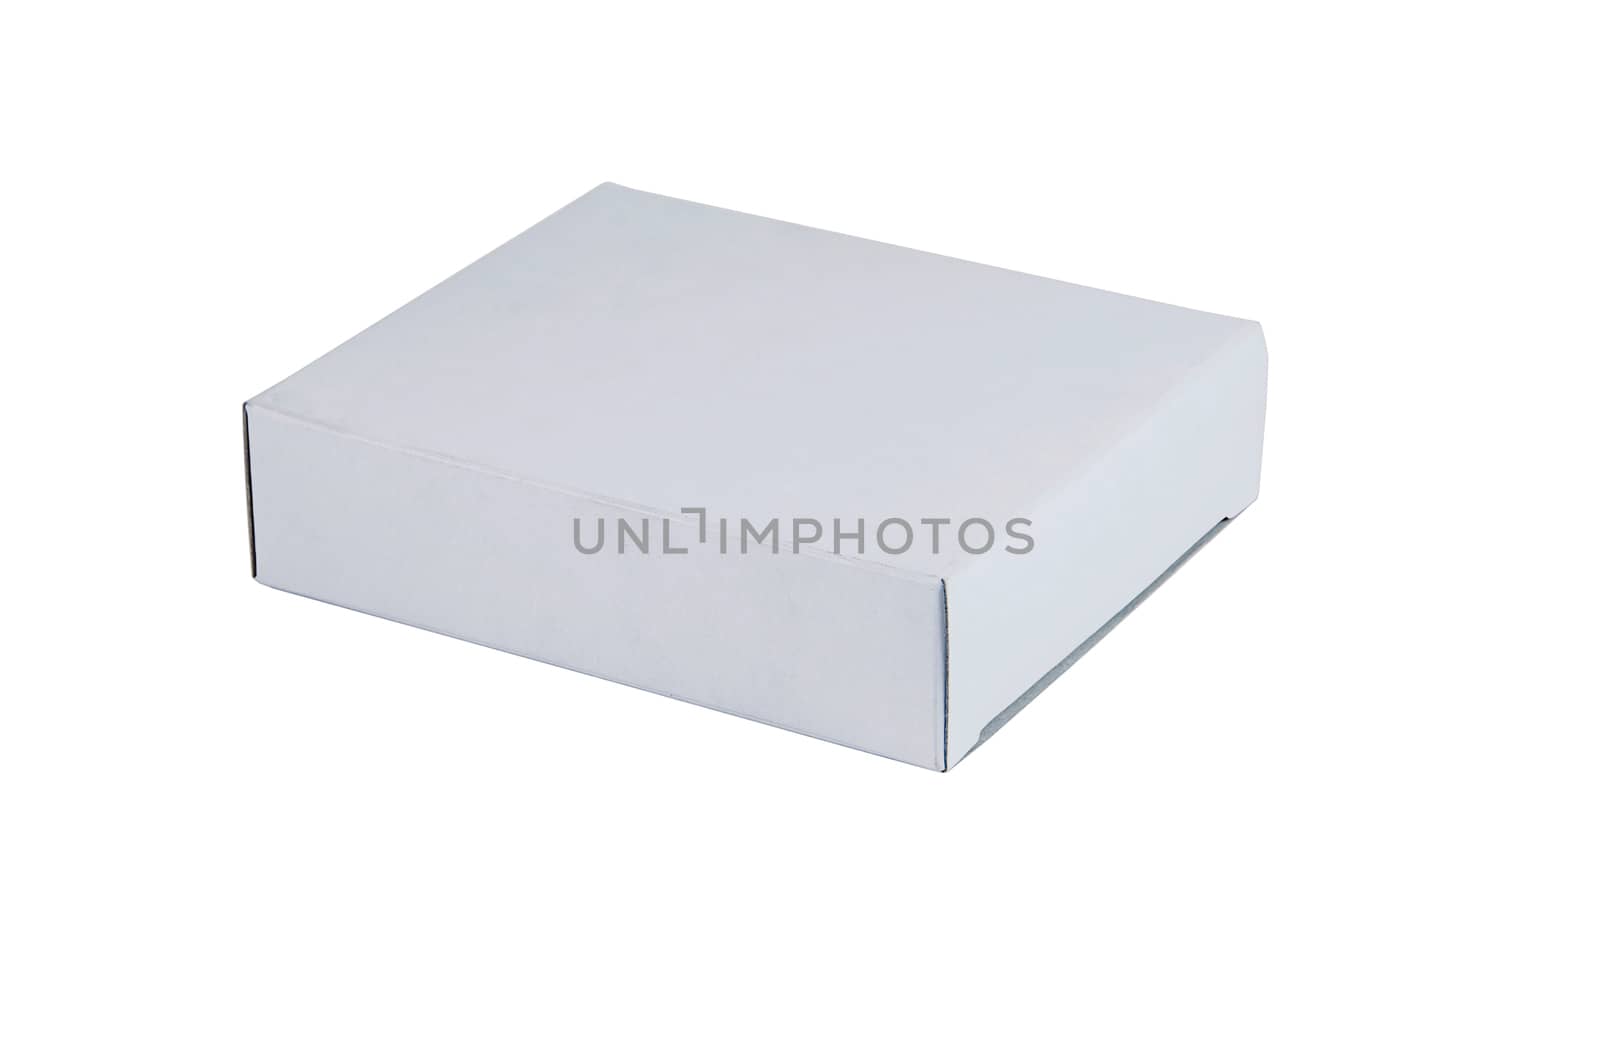 A white box isolated on white background with clipping path 